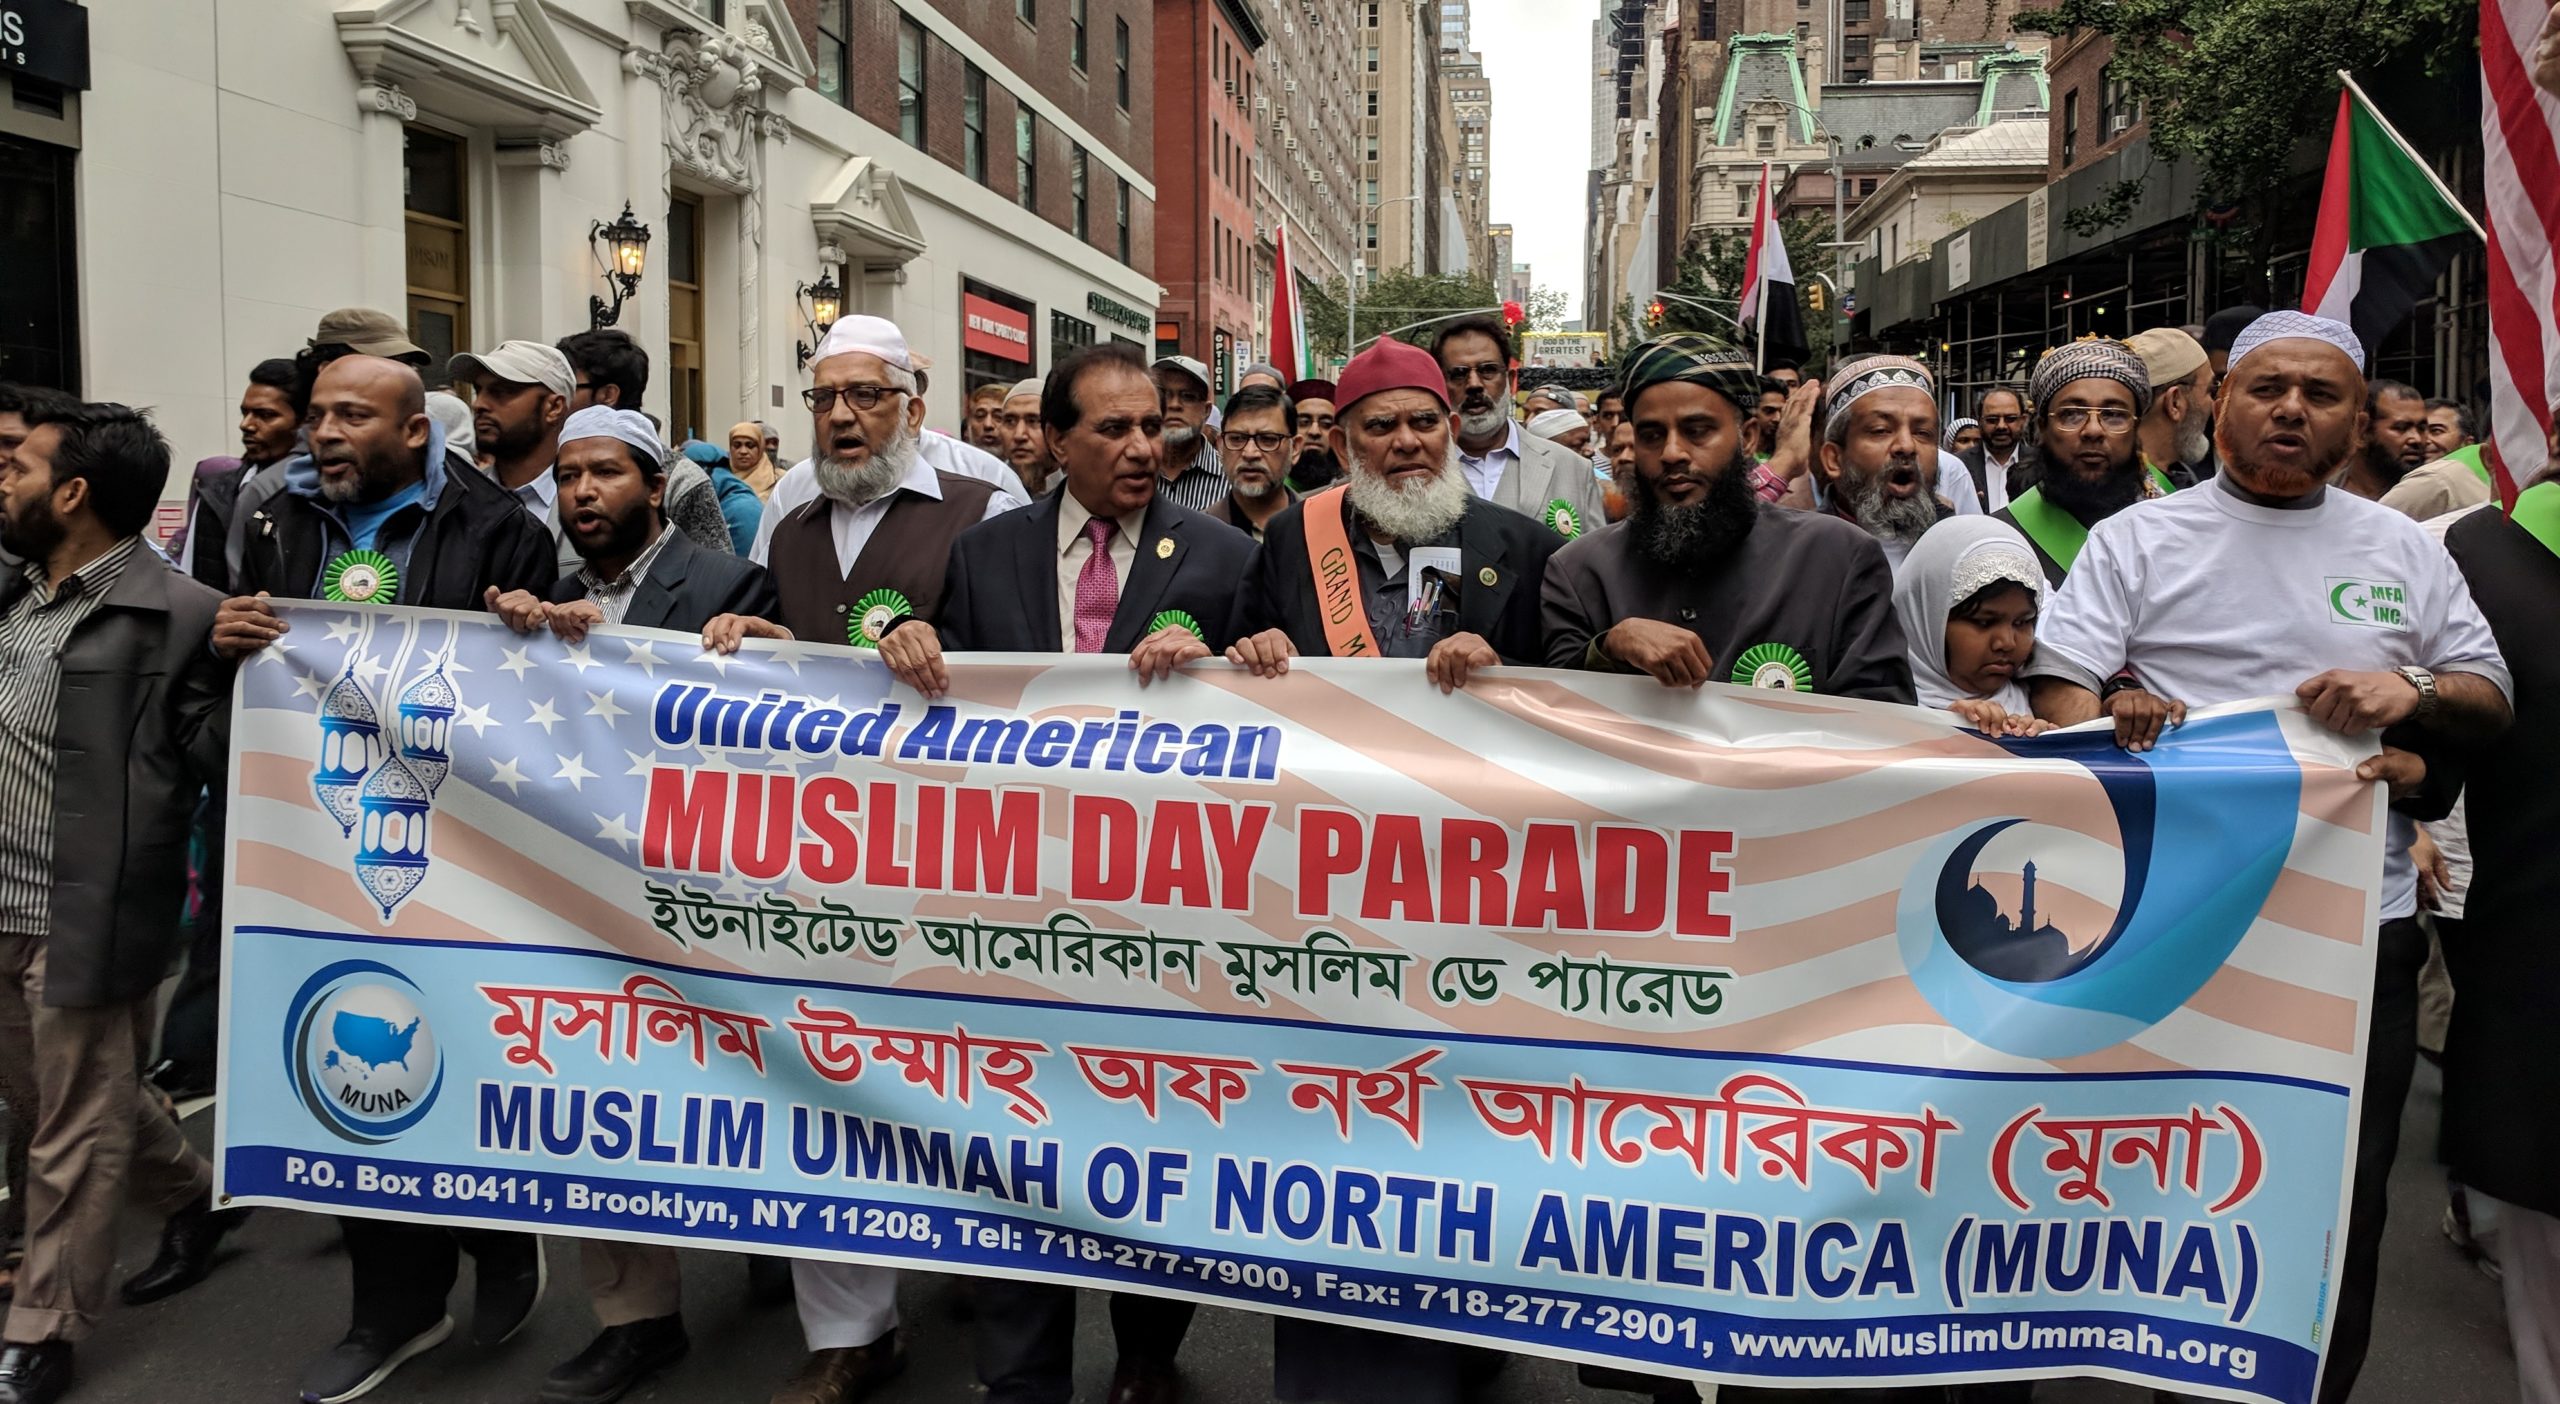 Muslim Day Parade 2018 in New york City